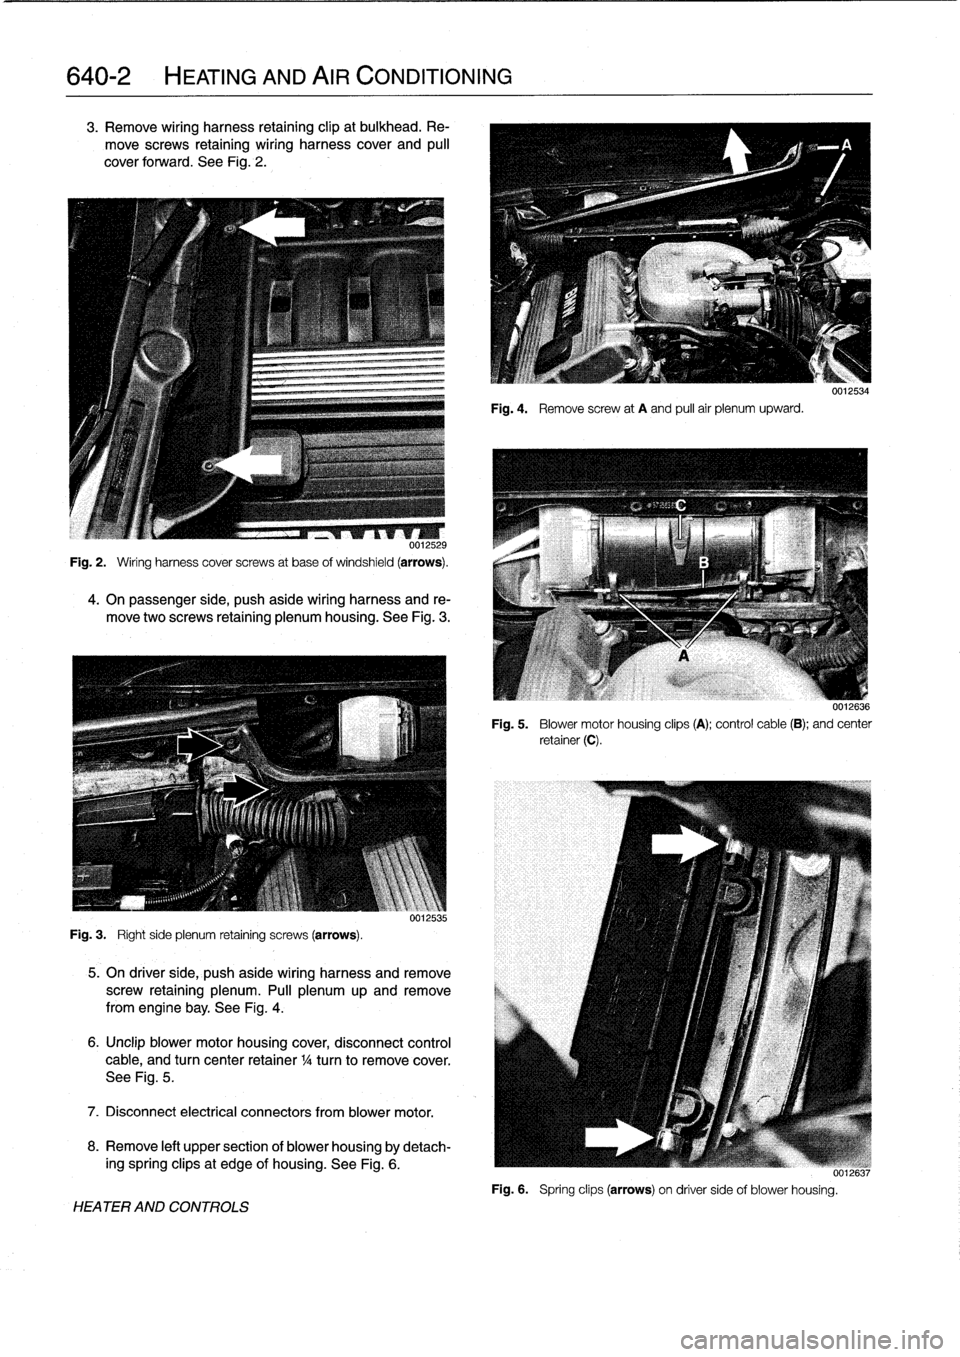 BMW 318i 1998 E36 Service Manual 
640-2

	

HEATING
AND
AIR
CONDITIONING

3
.
Remove
wiring
harness
retaining
clip
at
bulkhead
.
Re-

move
screws
retaining
wiring
harness
cover
and
pull

cover
forward
.
See
Fig
.
2
.

0012529

Fig
.
